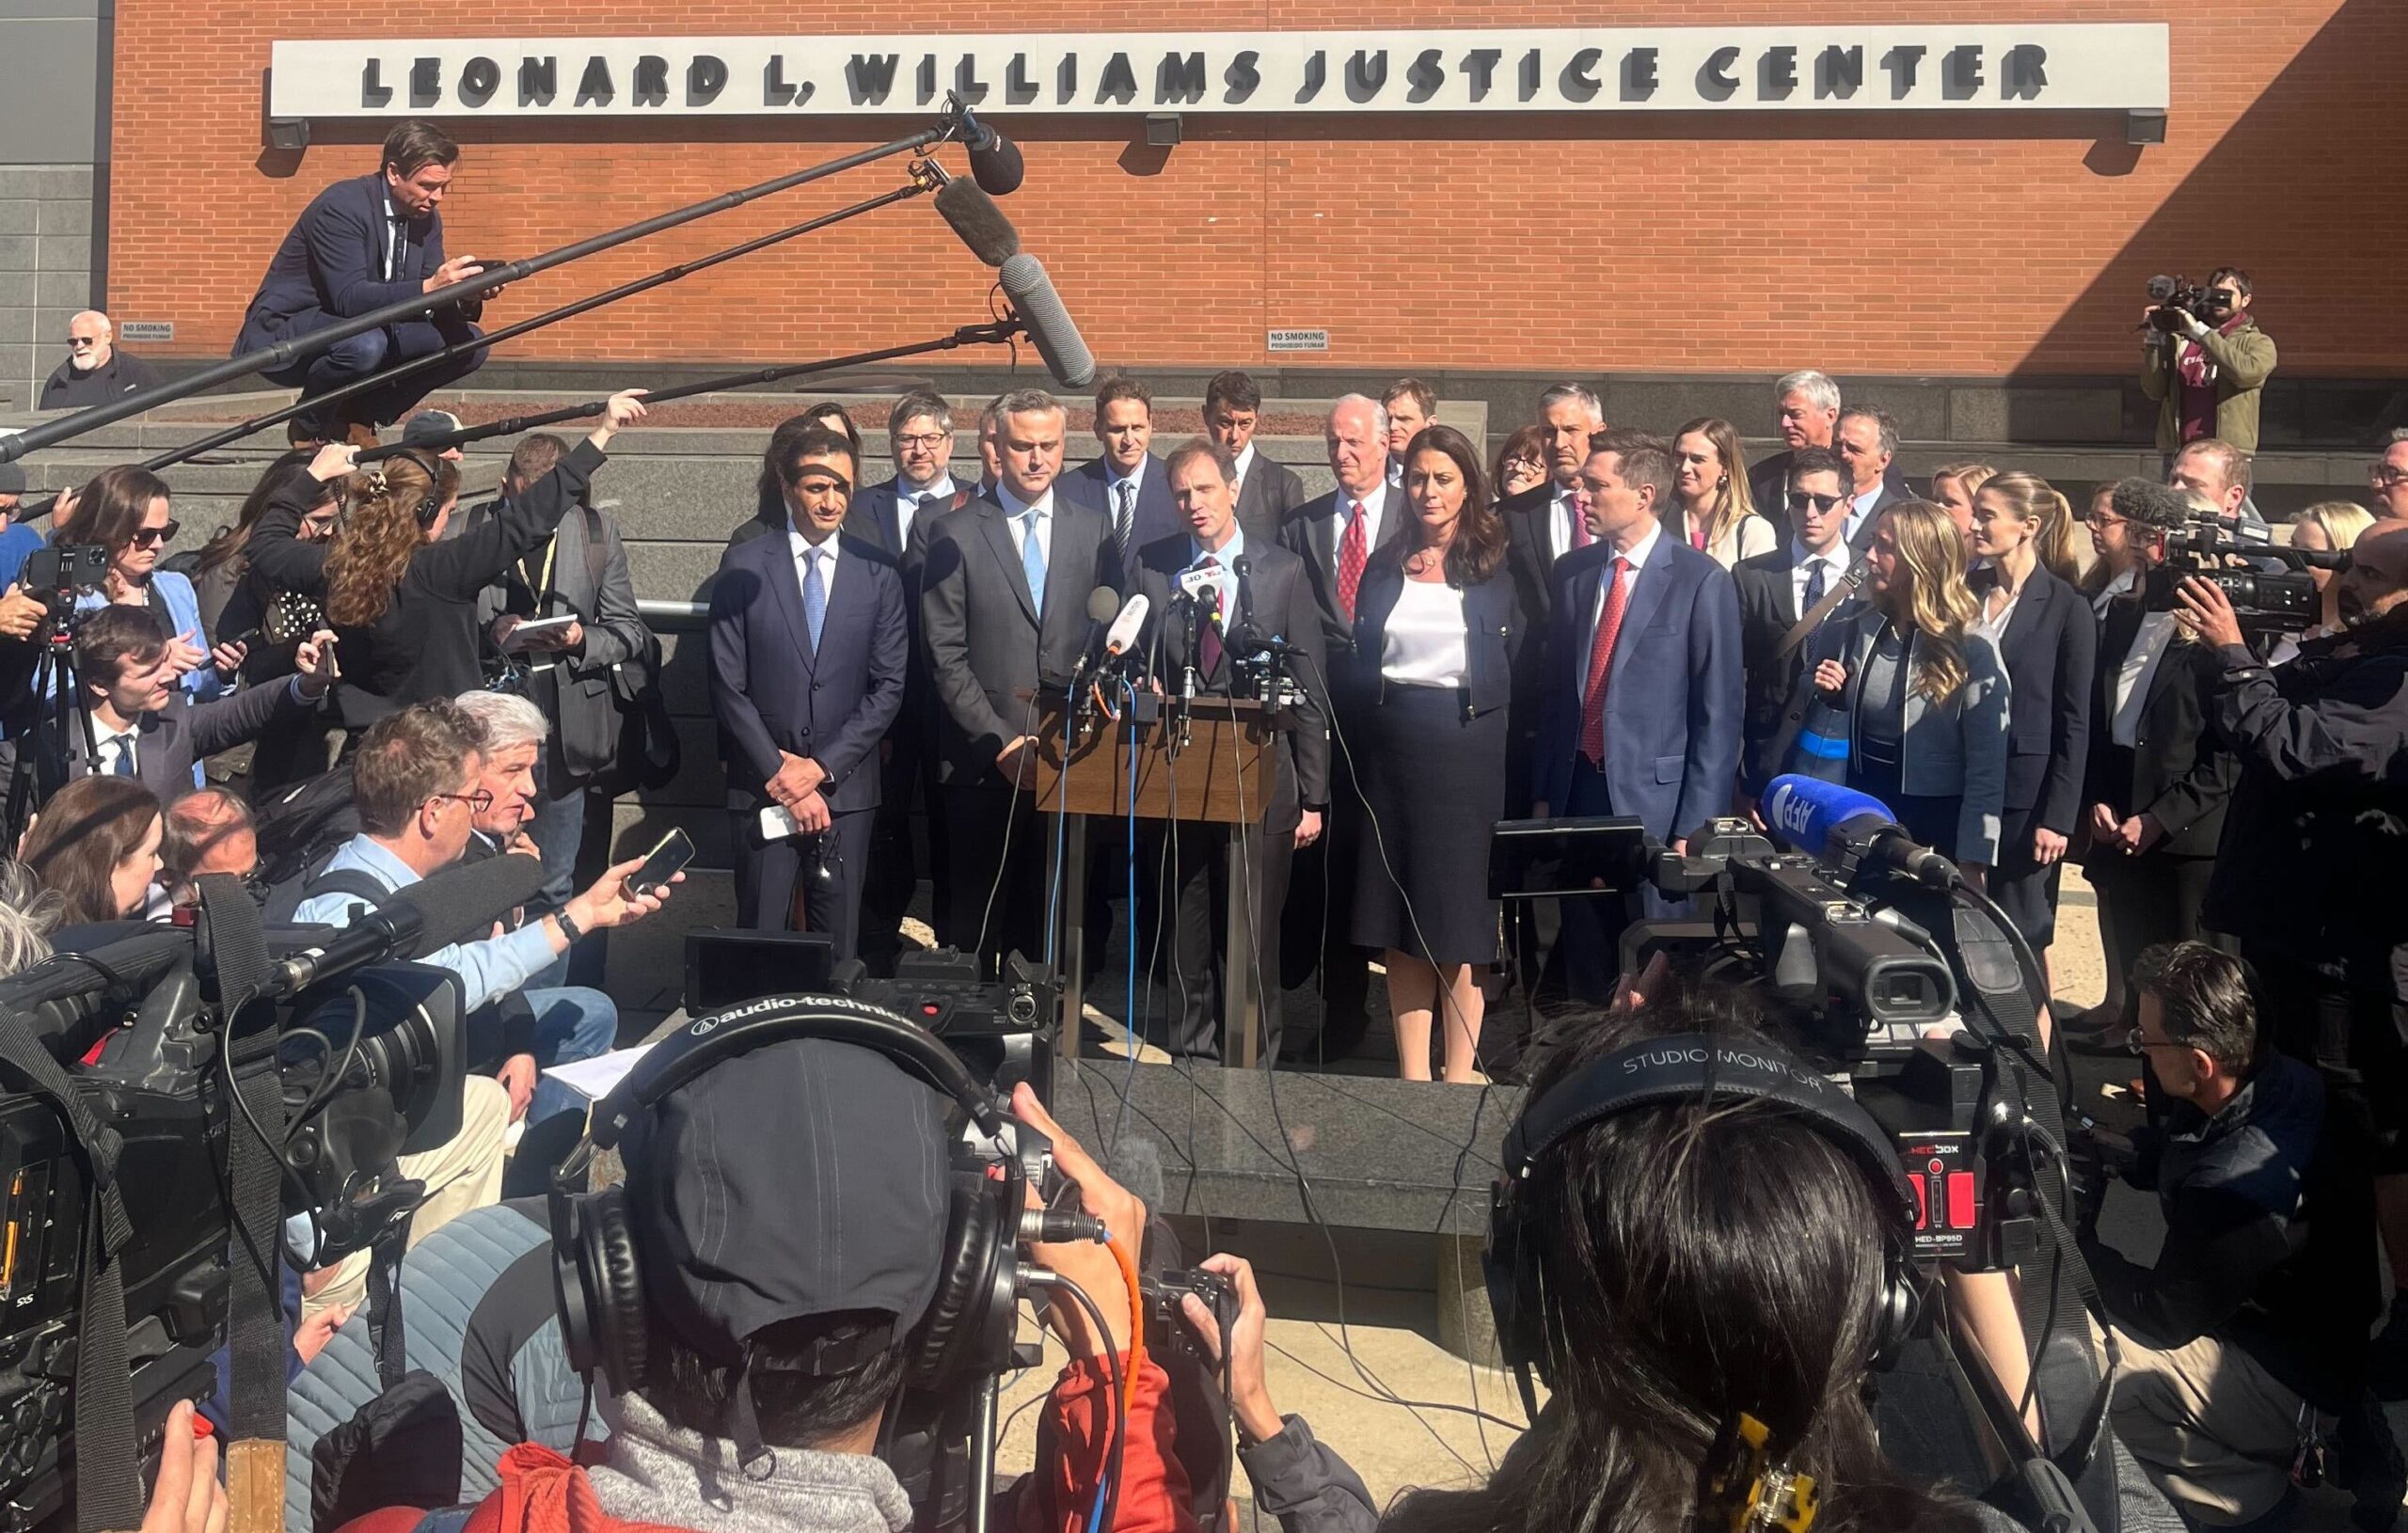 Dominion Voting Systems attorneys press conference